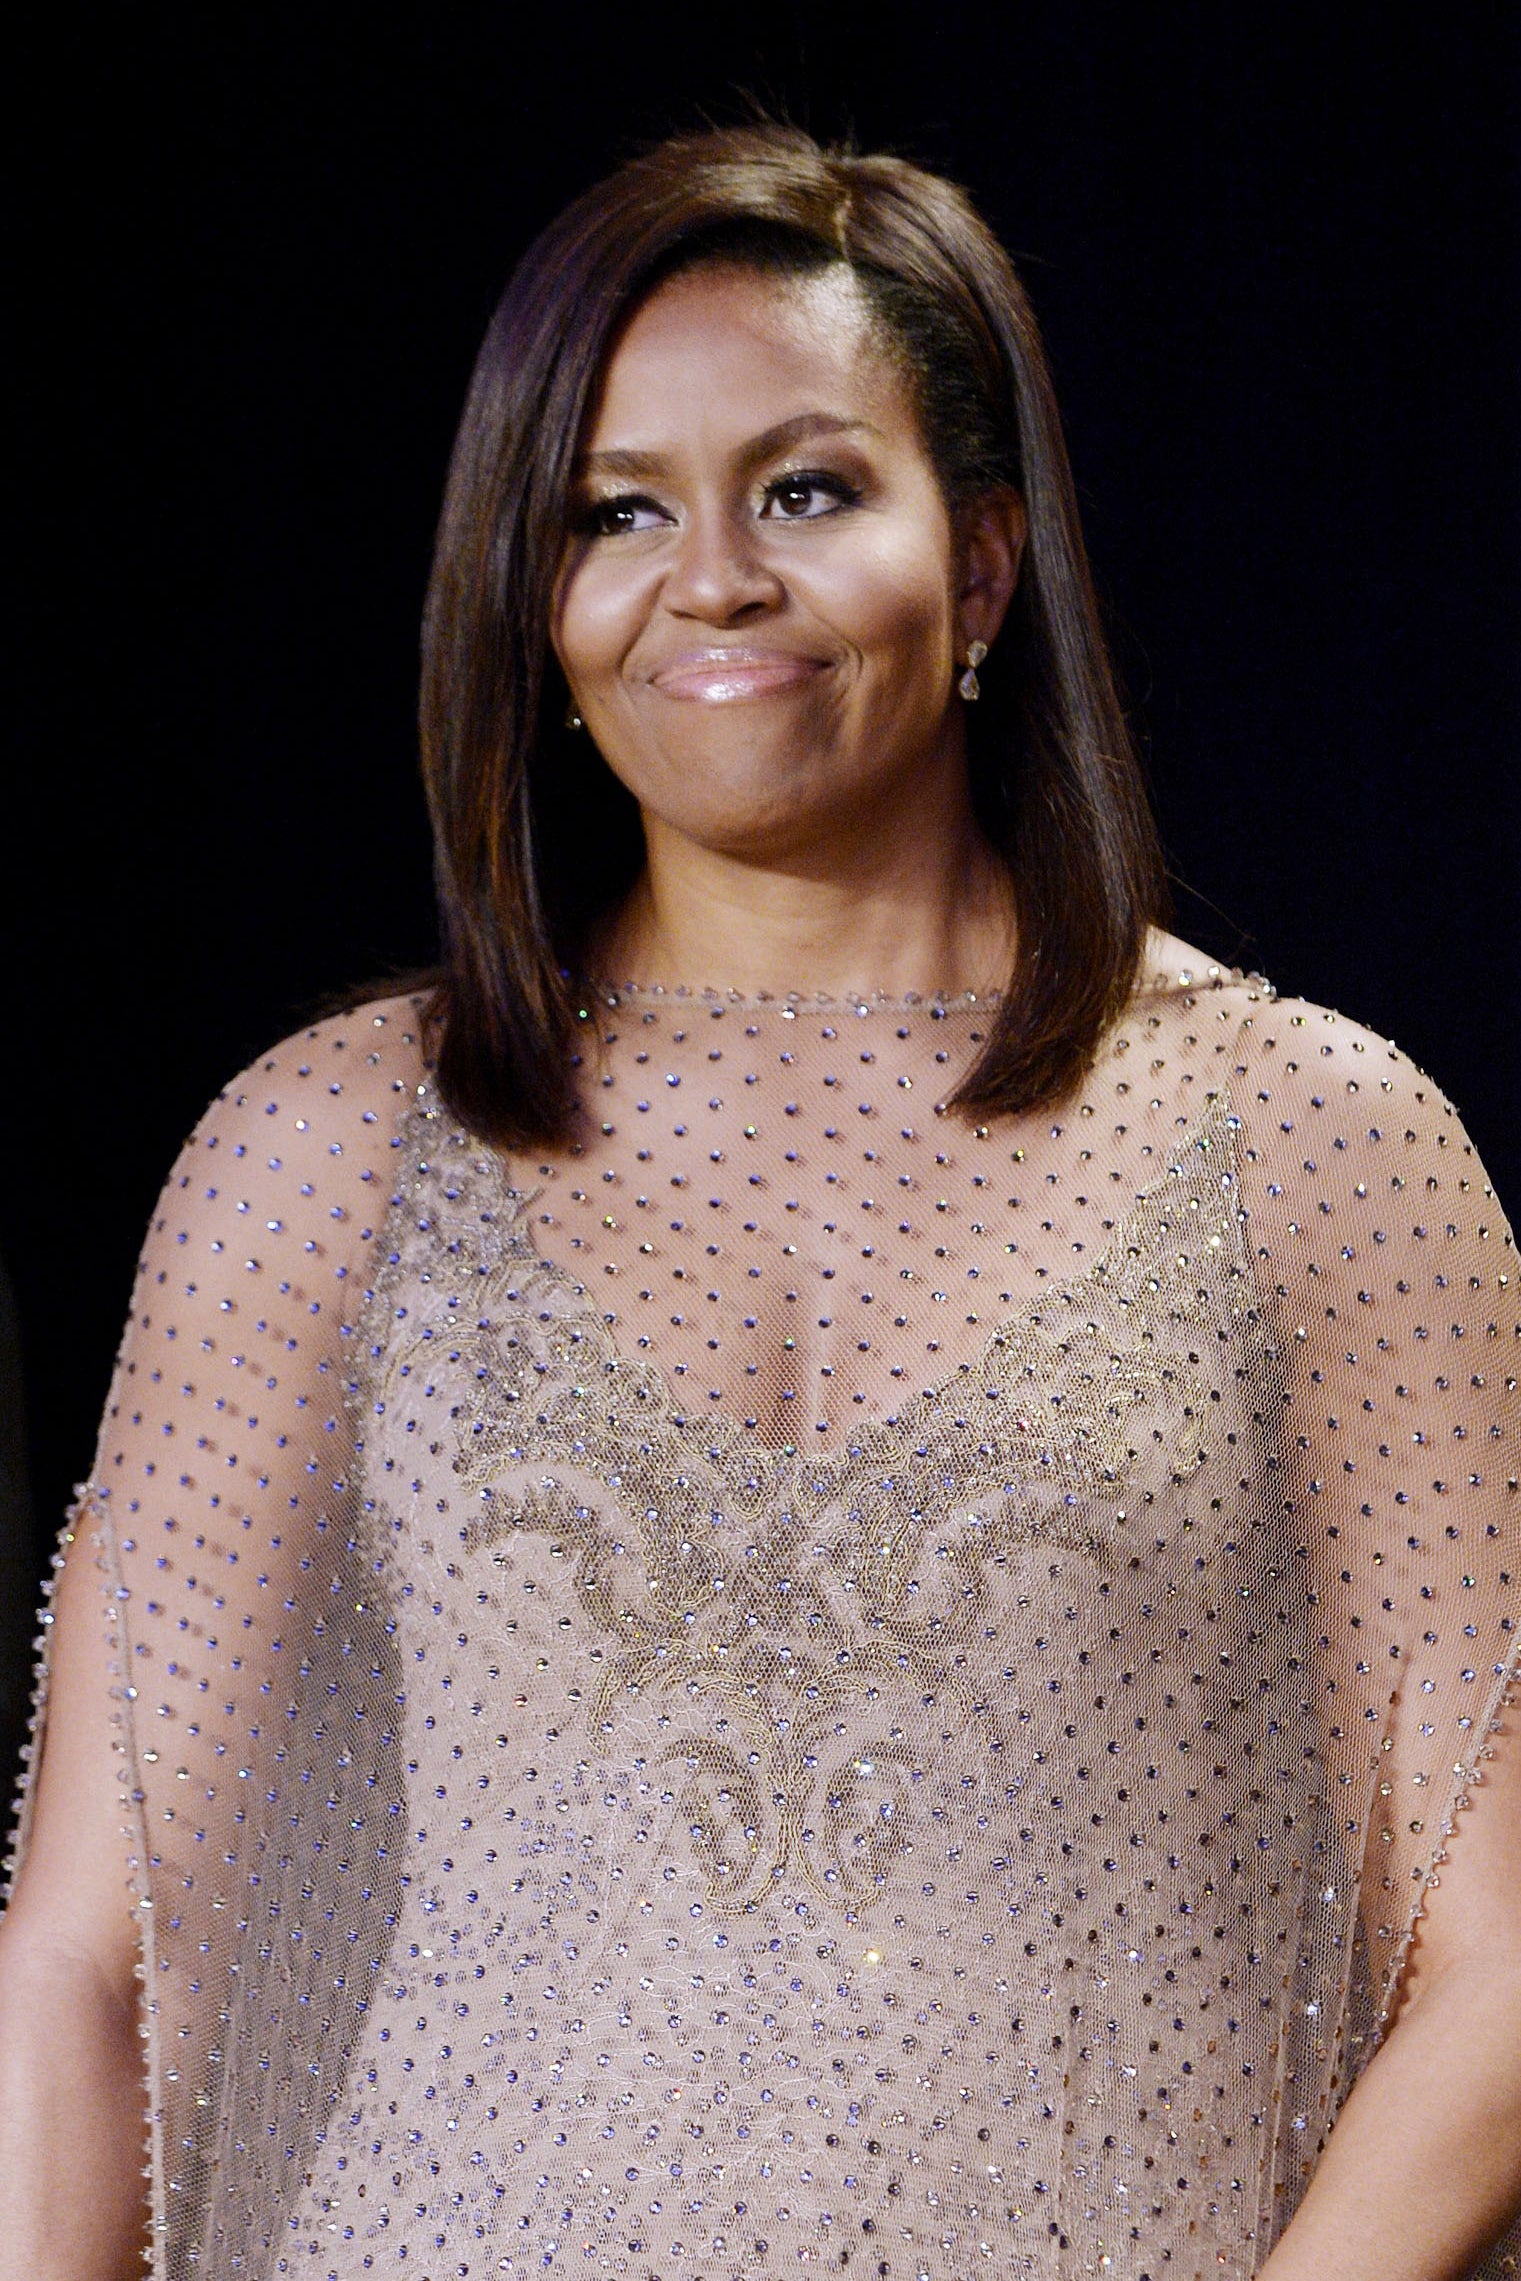 A Look Back At All Of Michelle Obama's Best Hair Moments In The White House
